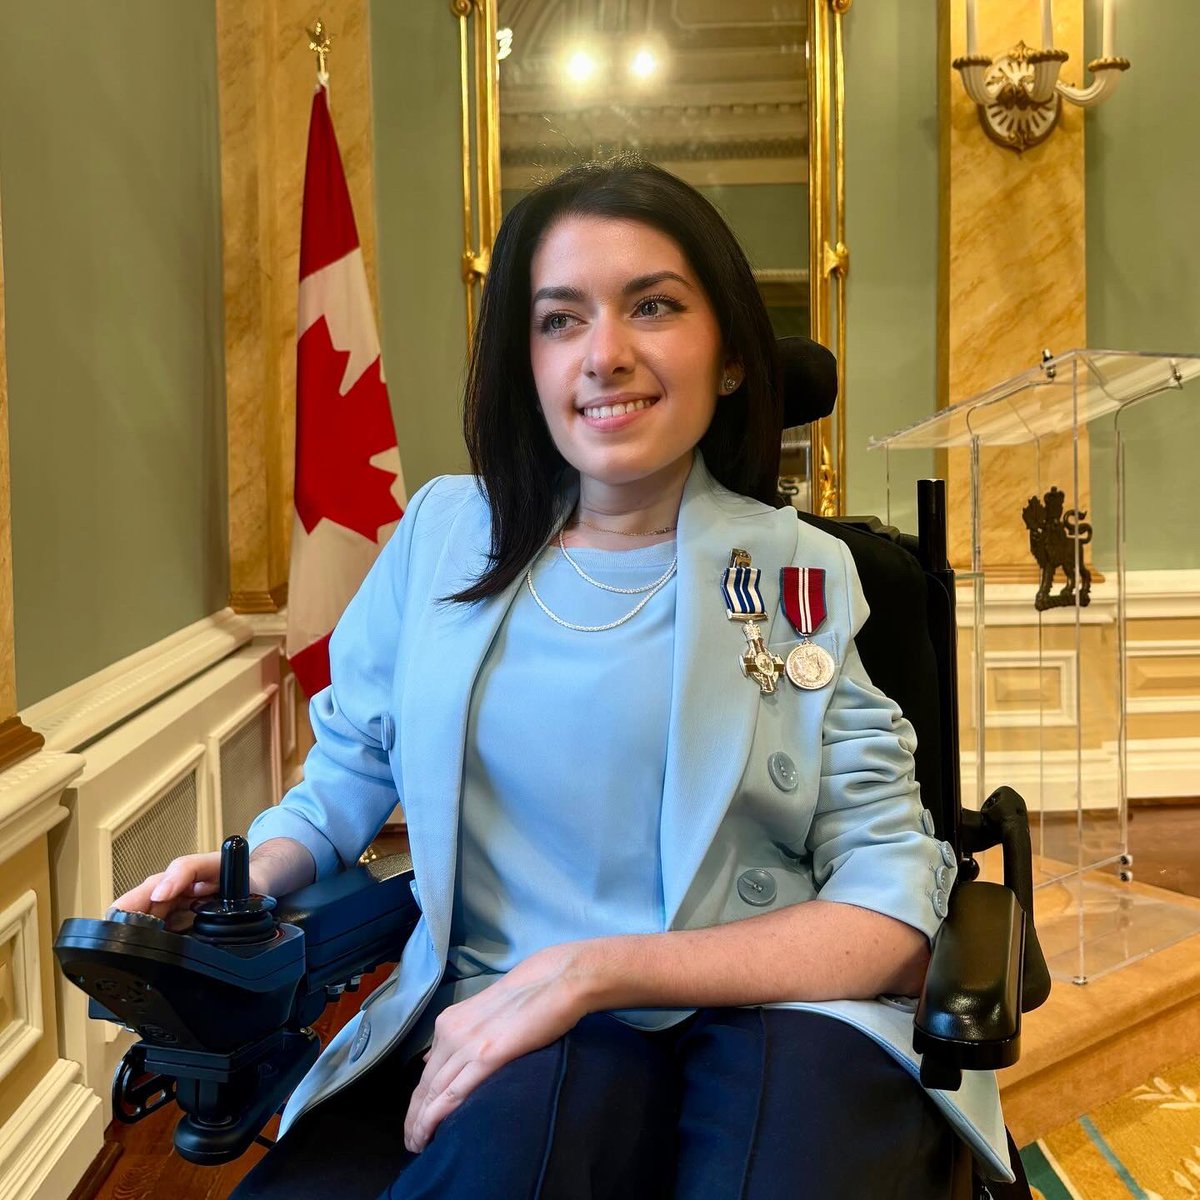 Today I received a Meritorious Service Decoration M.S.C. 🏅

I am so honoured to be recognized by Canada for my contributions to the country in advancing accessibility and disability rights.